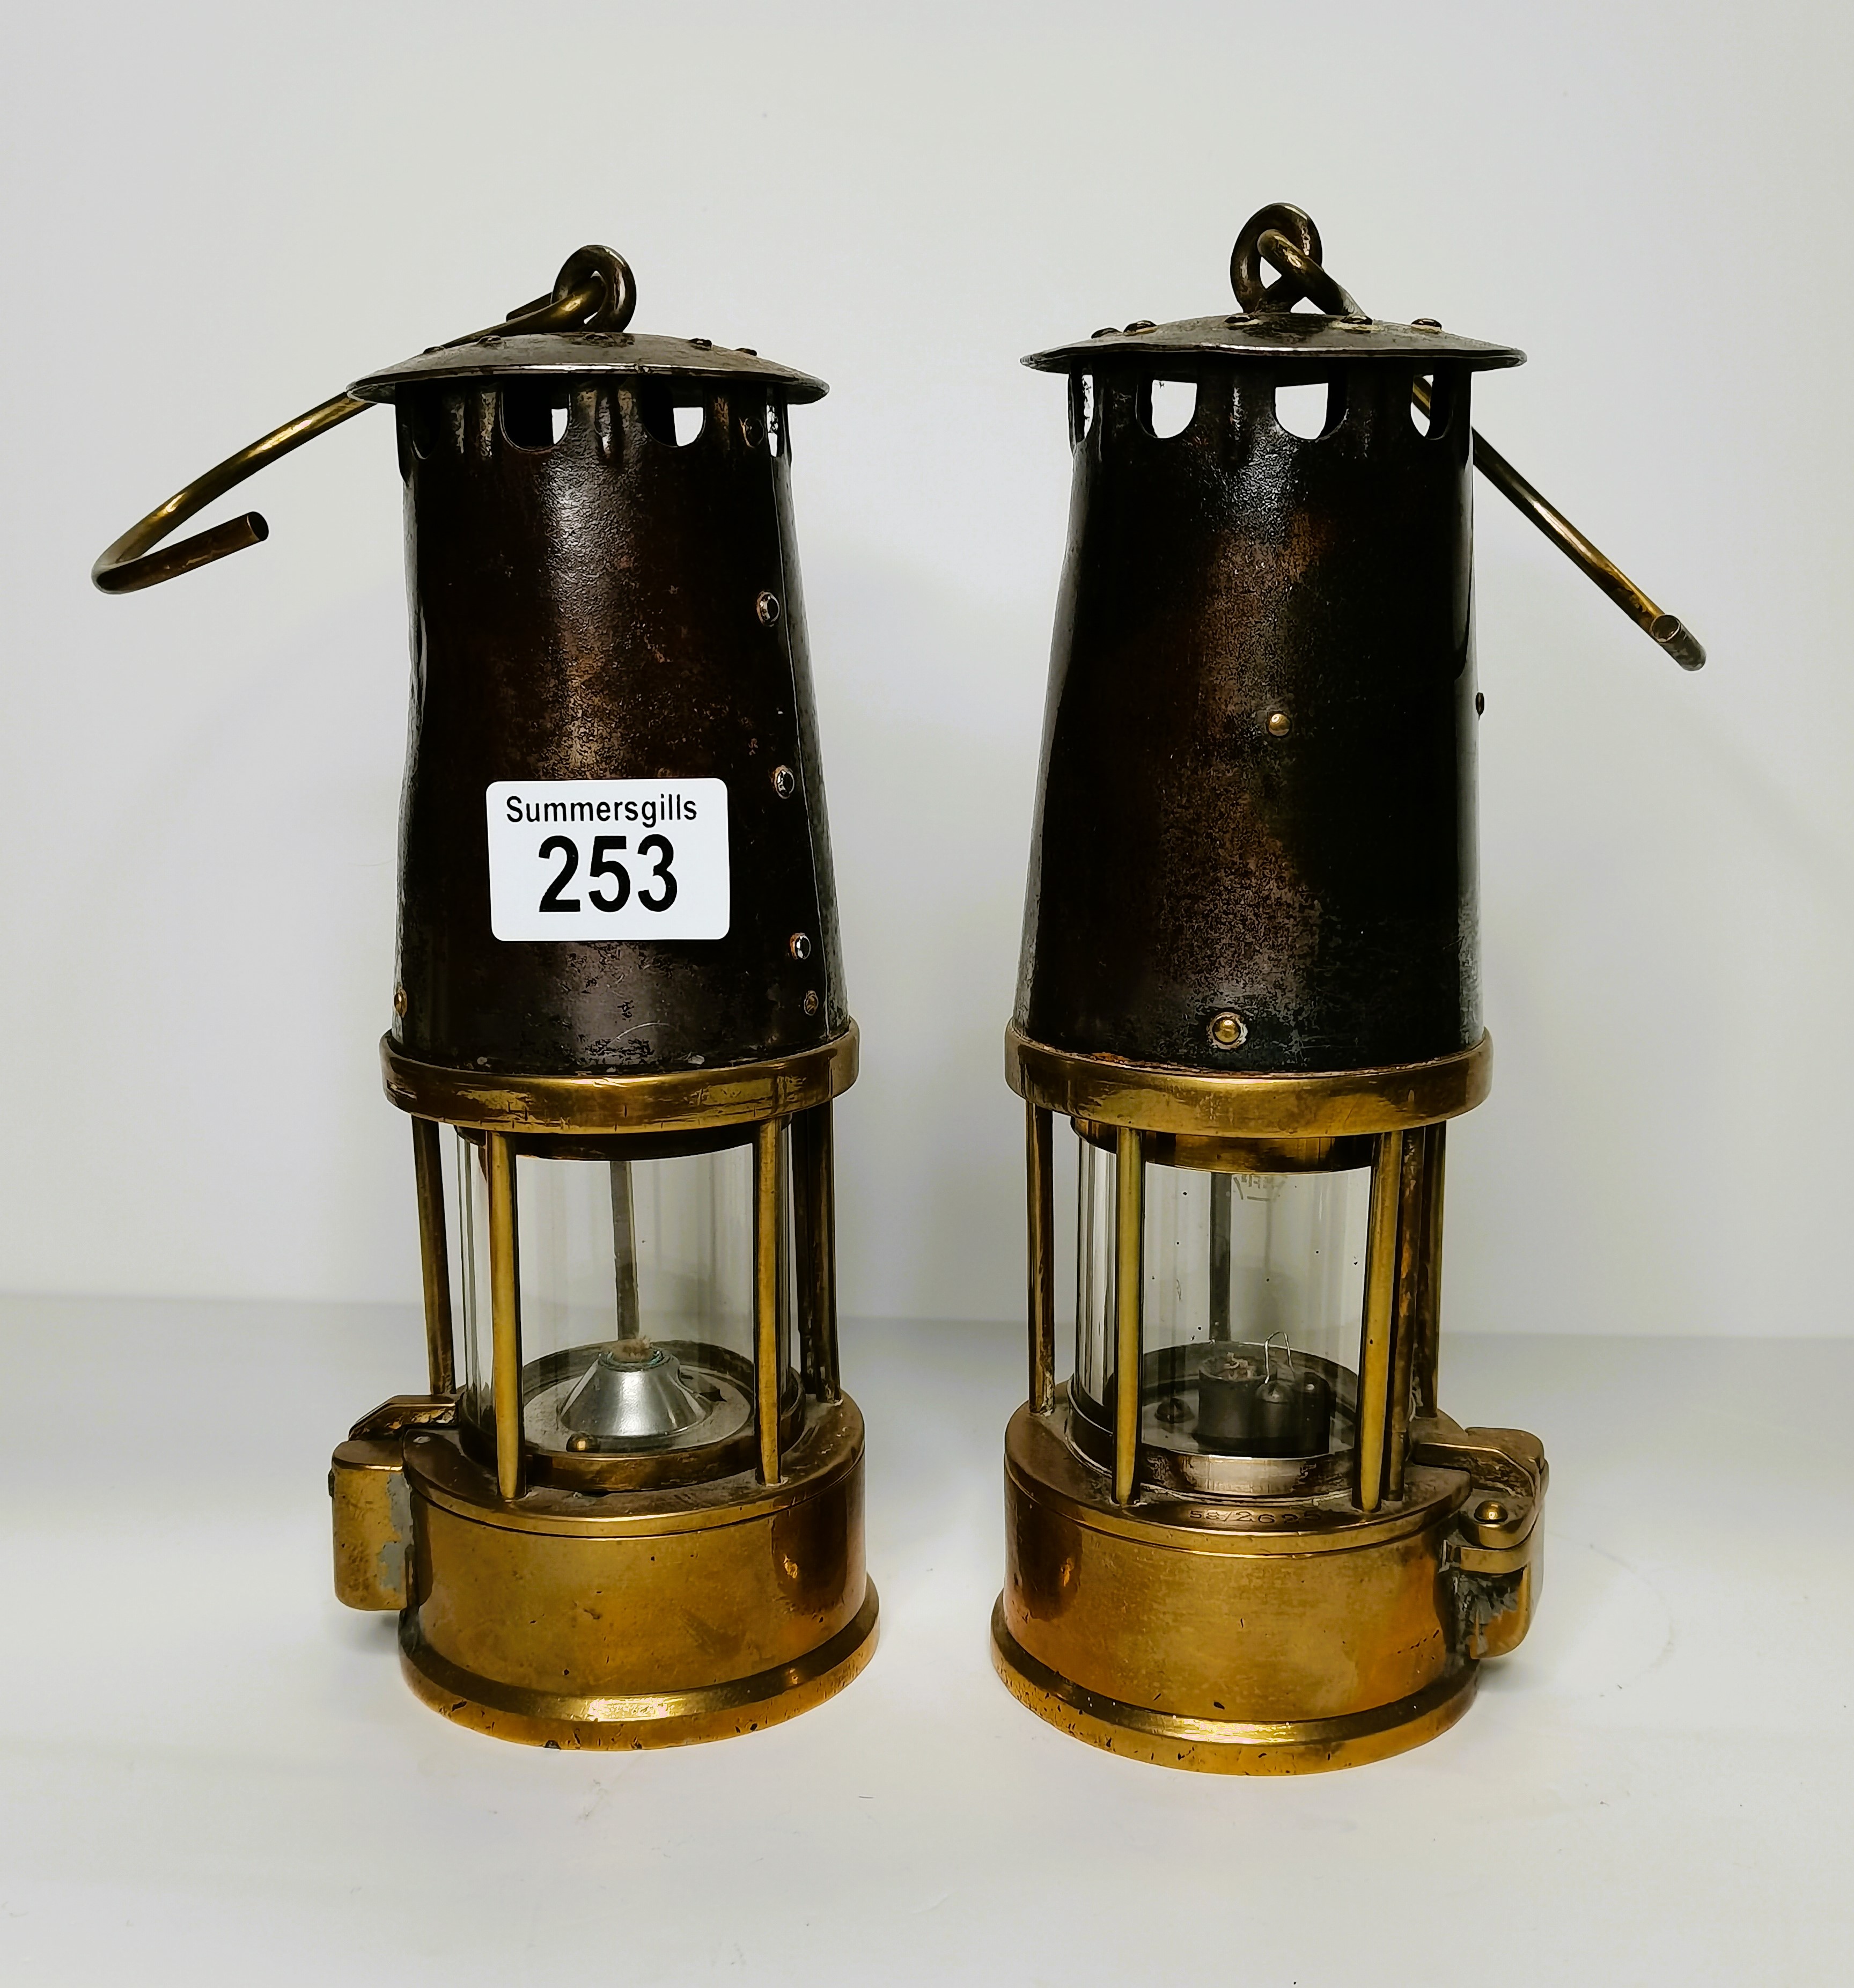 A pair of Protector Miners lamps